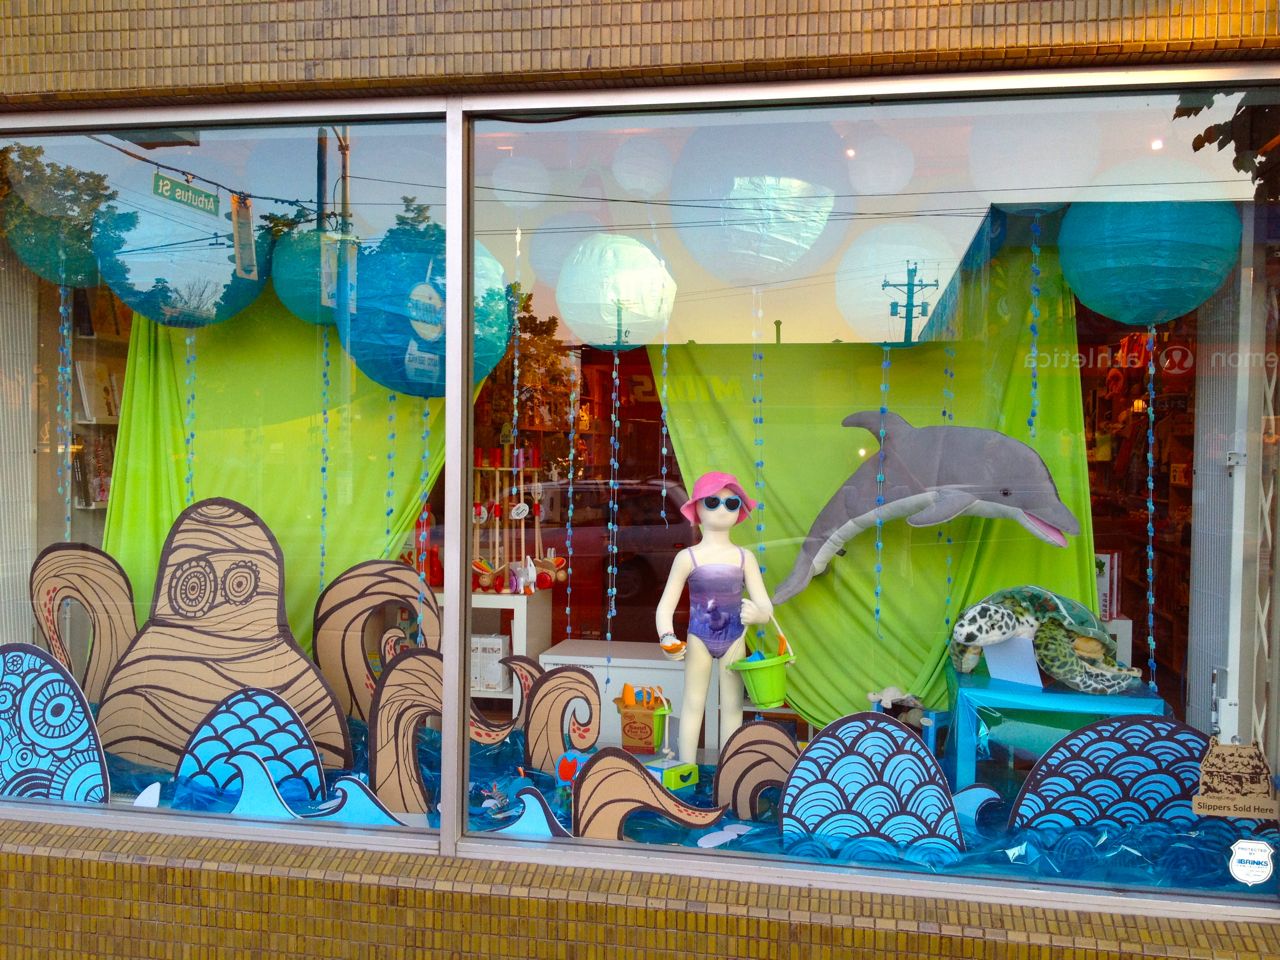 Hip Baby Blog: There's an octopus in our window!